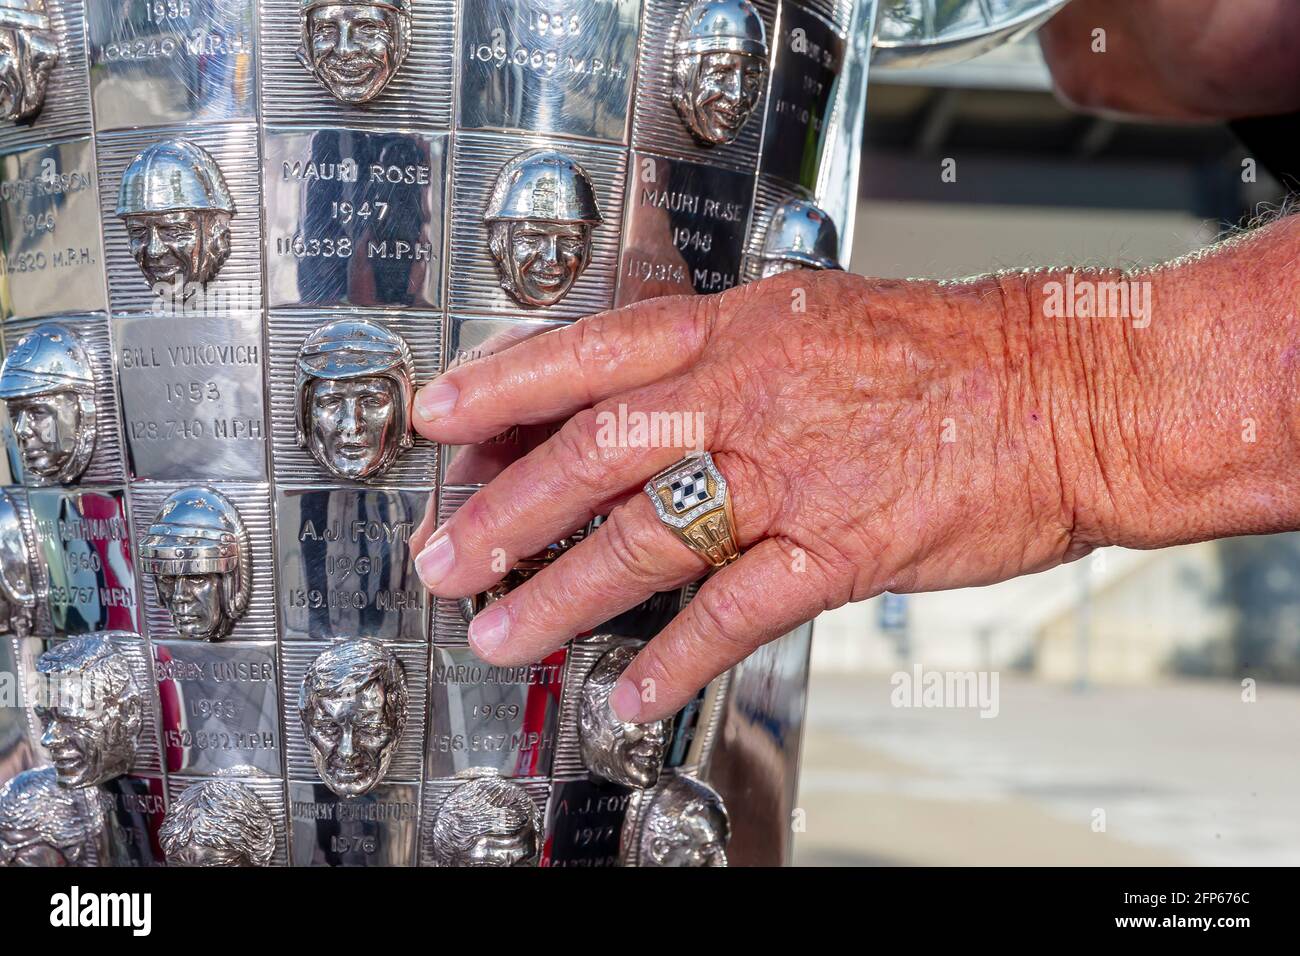 May 20, 2021, Indianapolis, Indiana, USA: 4 Time Indy500 winner, AJ Foyt, Jr poses with his 1961 winning car with the Borg Warner Trophy and his ABC Supply entry driven by JR Hildebrand. (Credit Image: © Brian Spurlock Grindstone Media/ASP via ZUMA Wire) Stock Photo